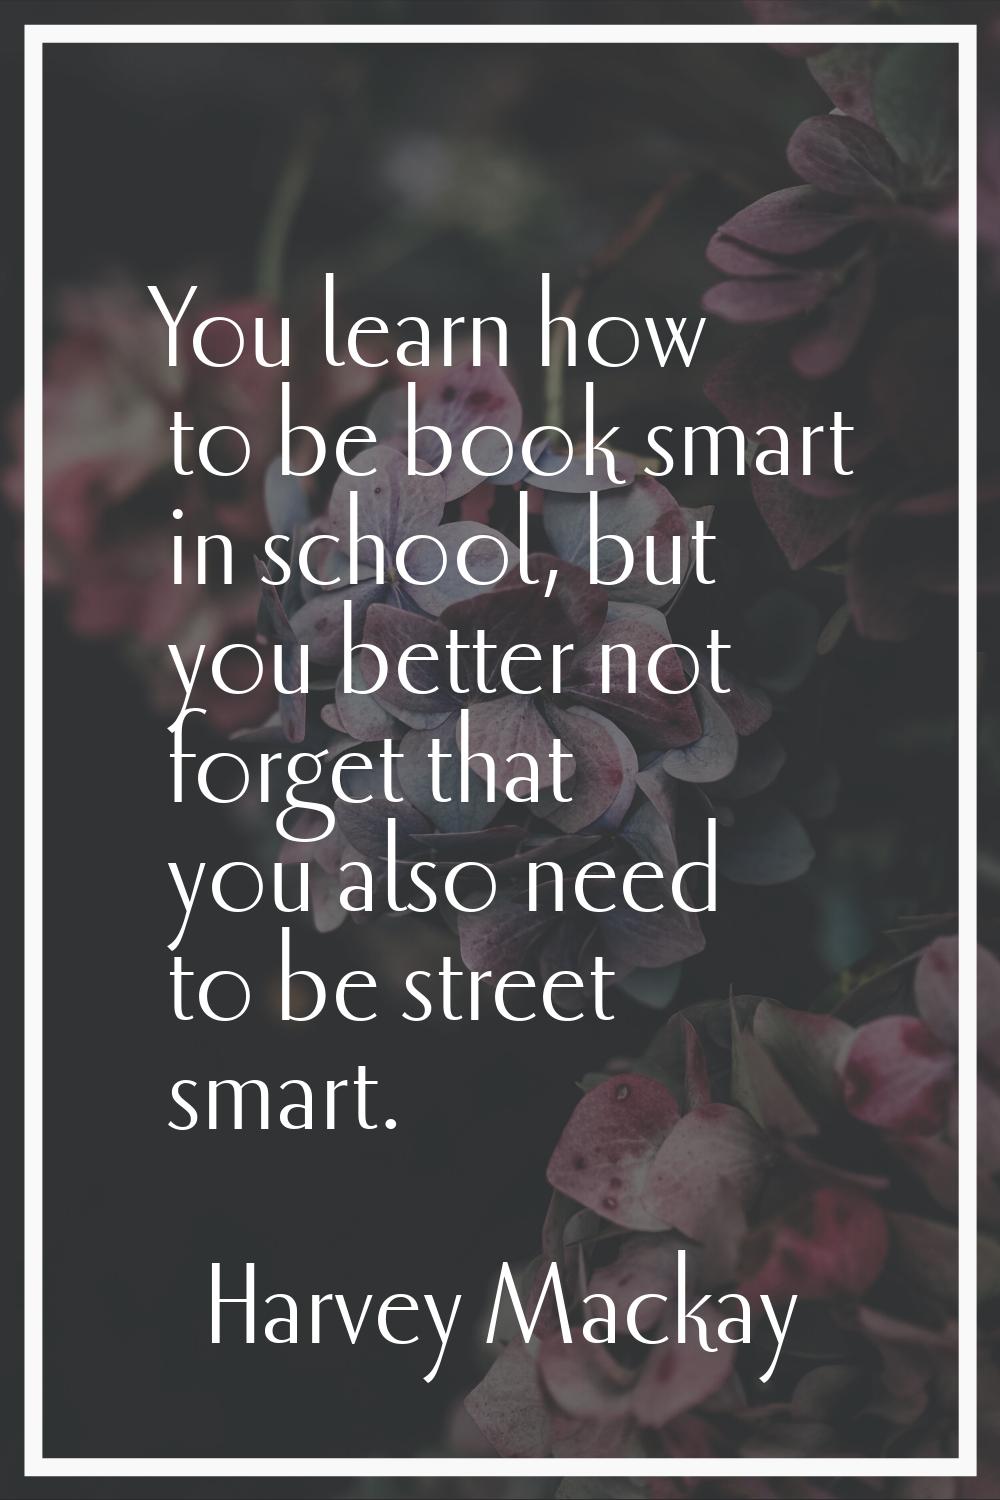 You learn how to be book smart in school, but you better not forget that you also need to be street